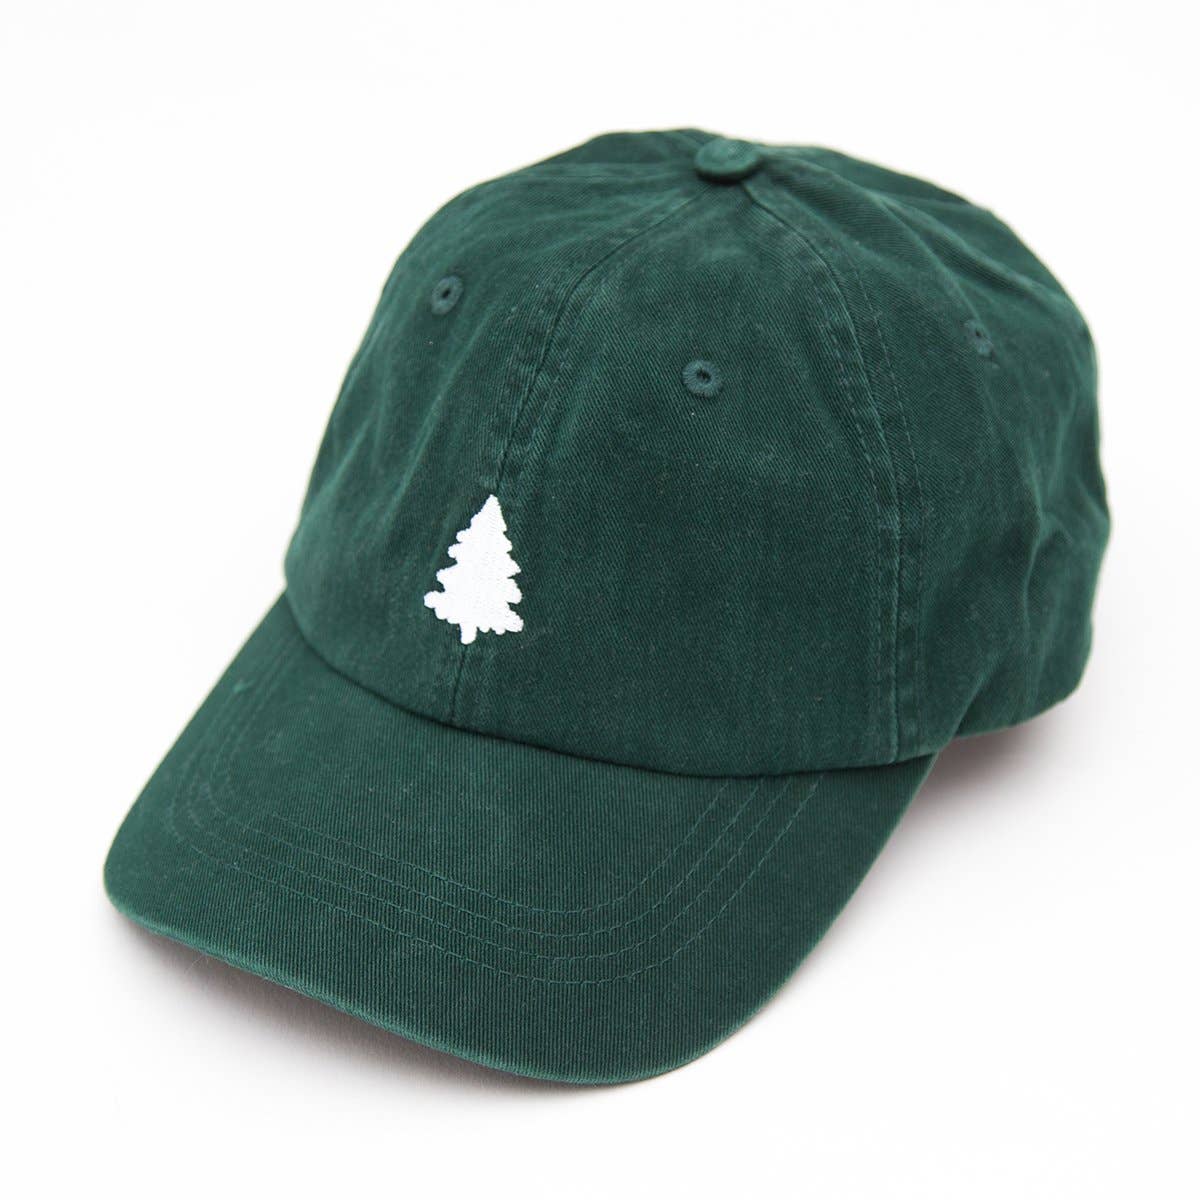 Dark green hat with white fir pine on front by Happy Earth